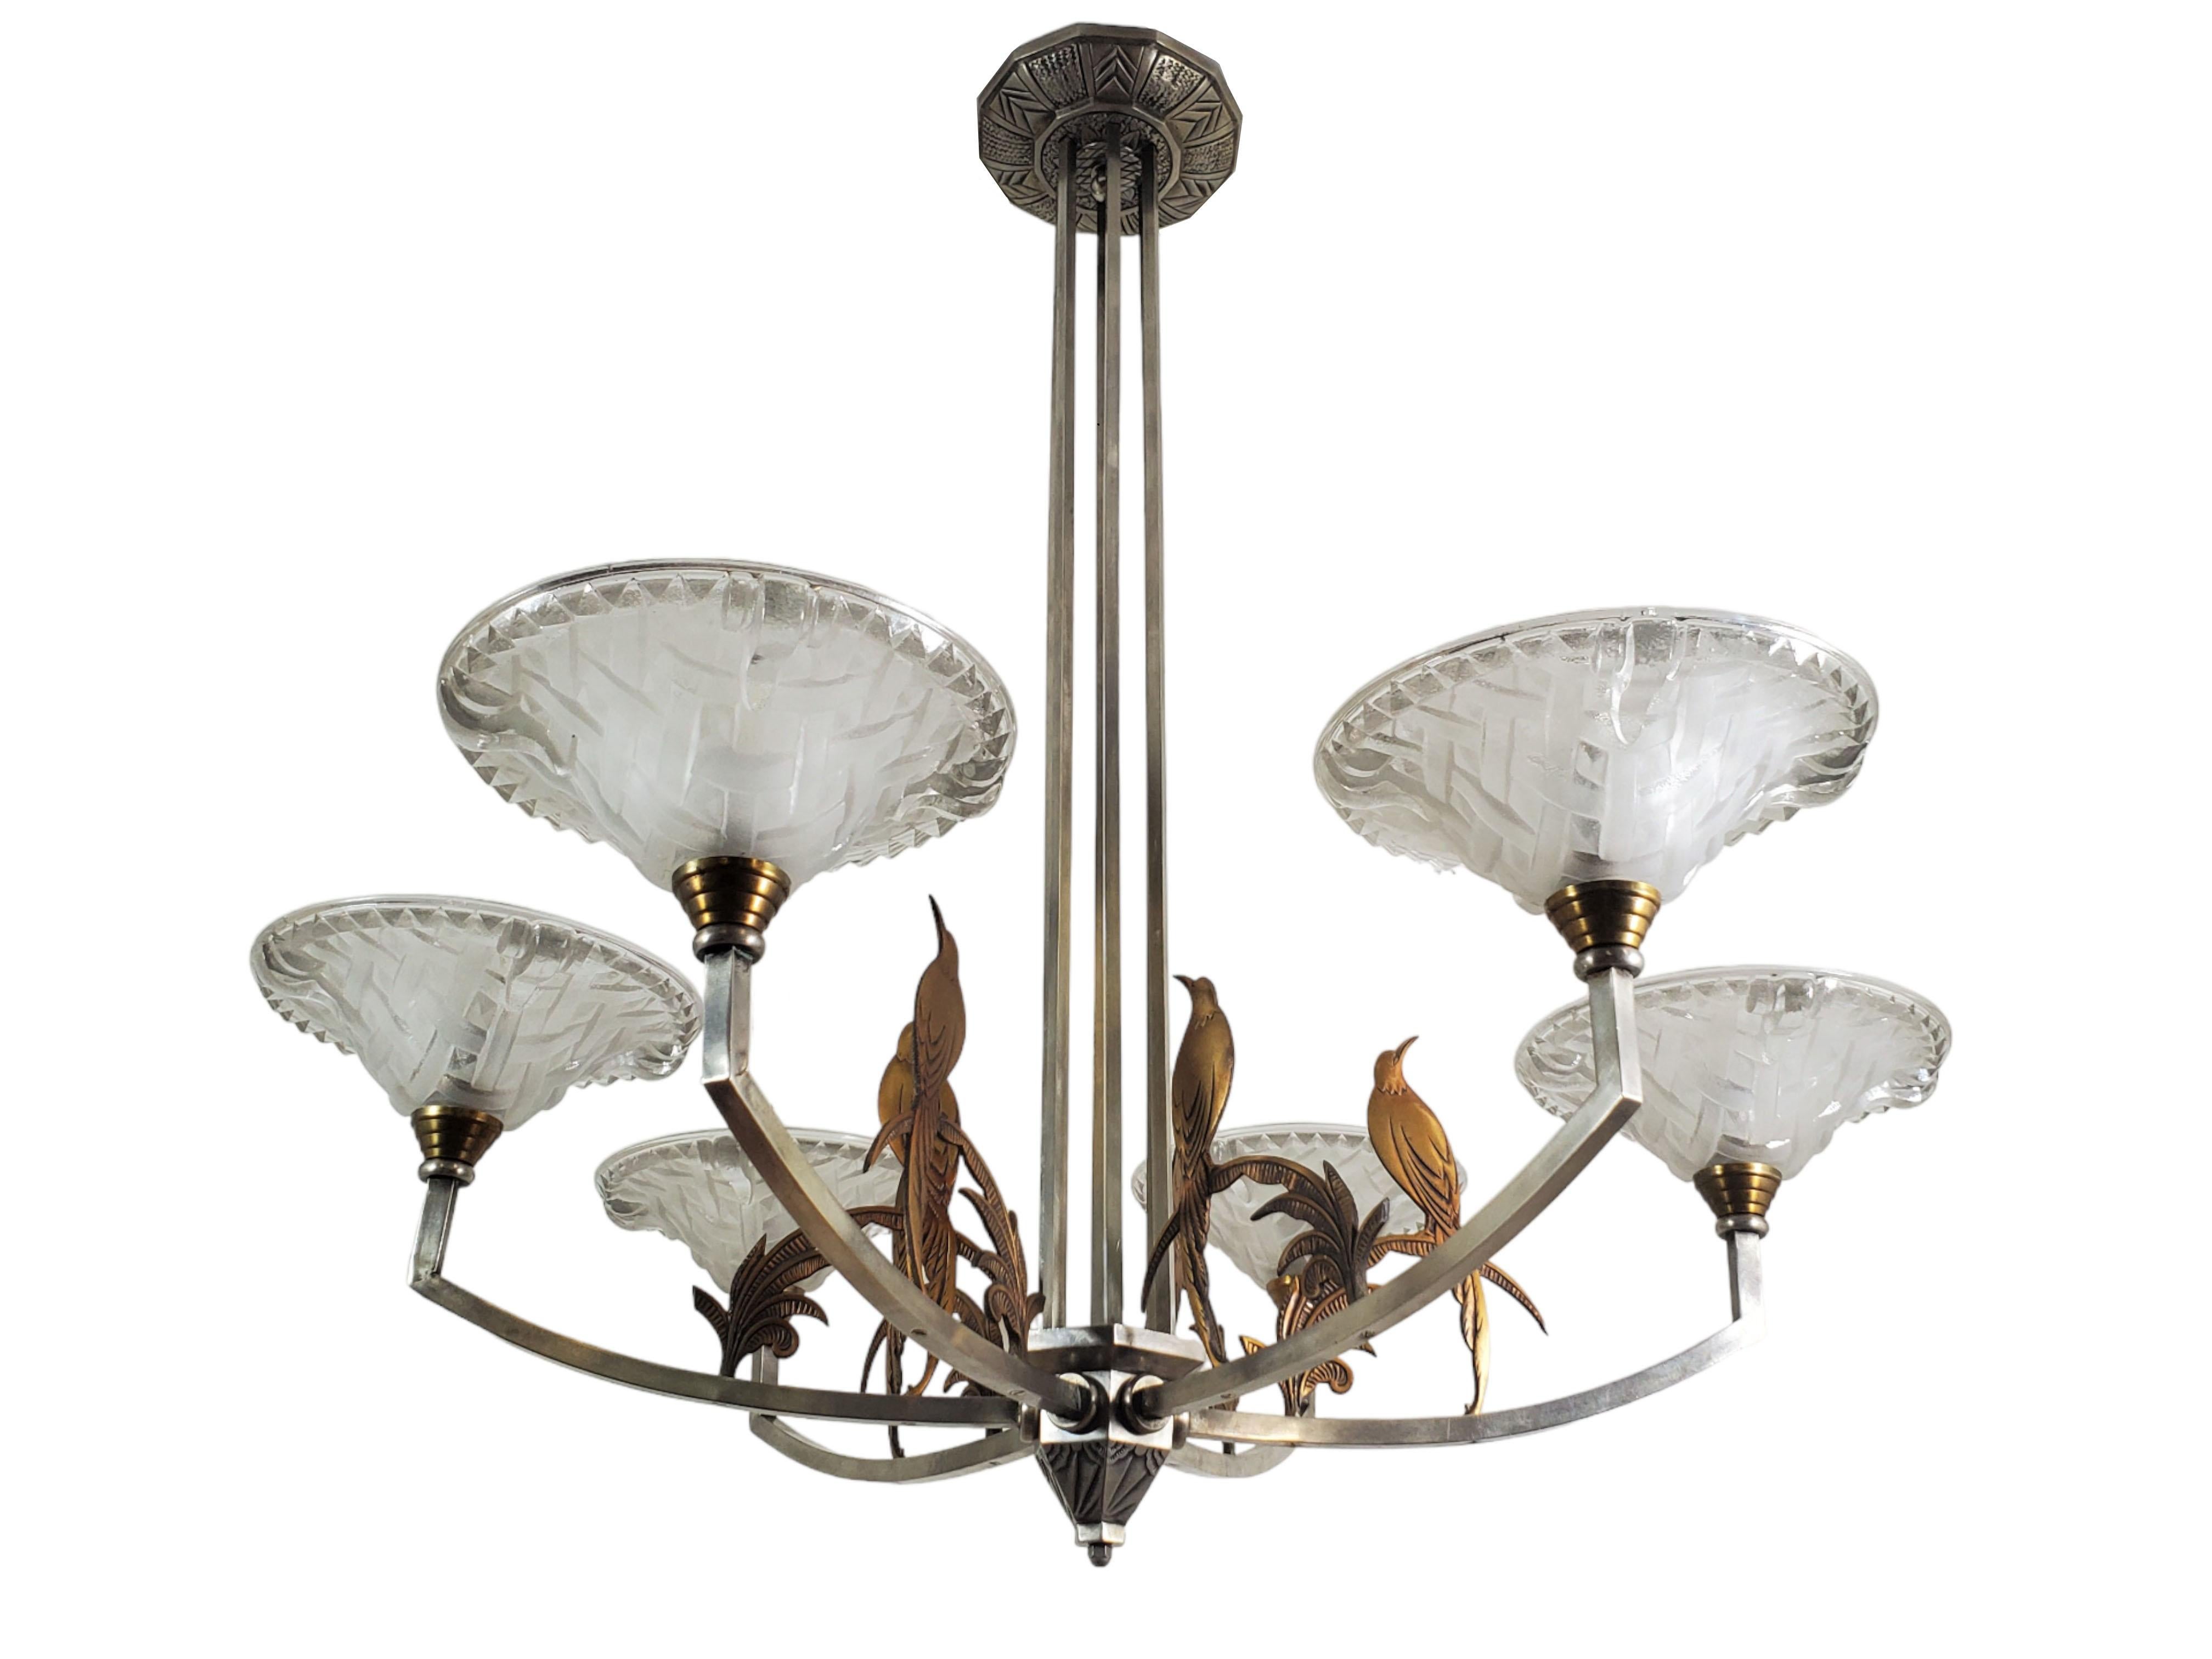 A unique and large French Art Deco chandelier attributed to Ezan with an intriguing two-tone finish, boasts six arms in a stunning arrangement. Each arm is adorned with exquisitely molded frosted art glass cups exhibiting a captivating geometric